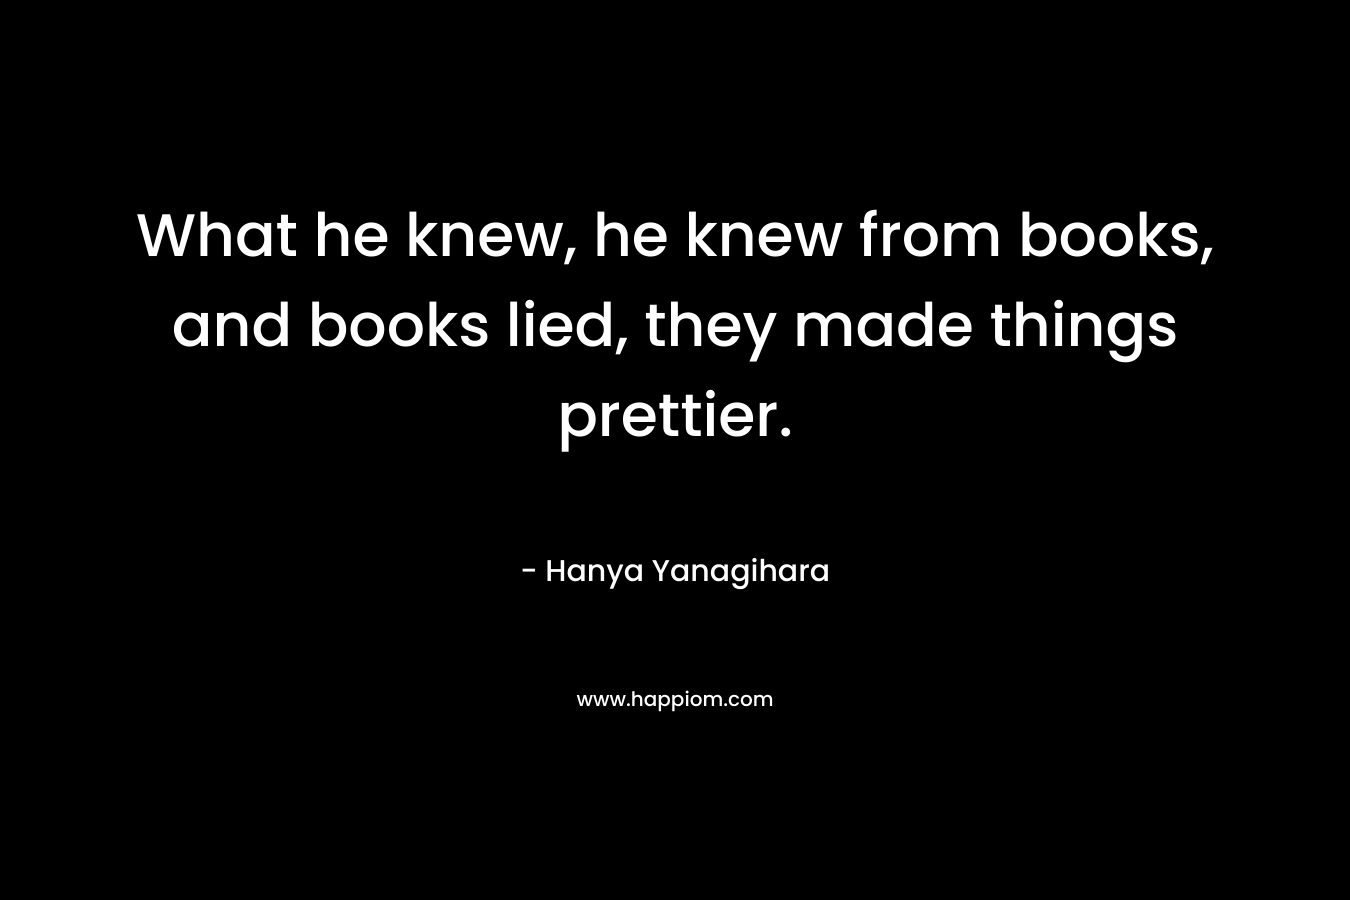 What he knew, he knew from books, and books lied, they made things prettier.